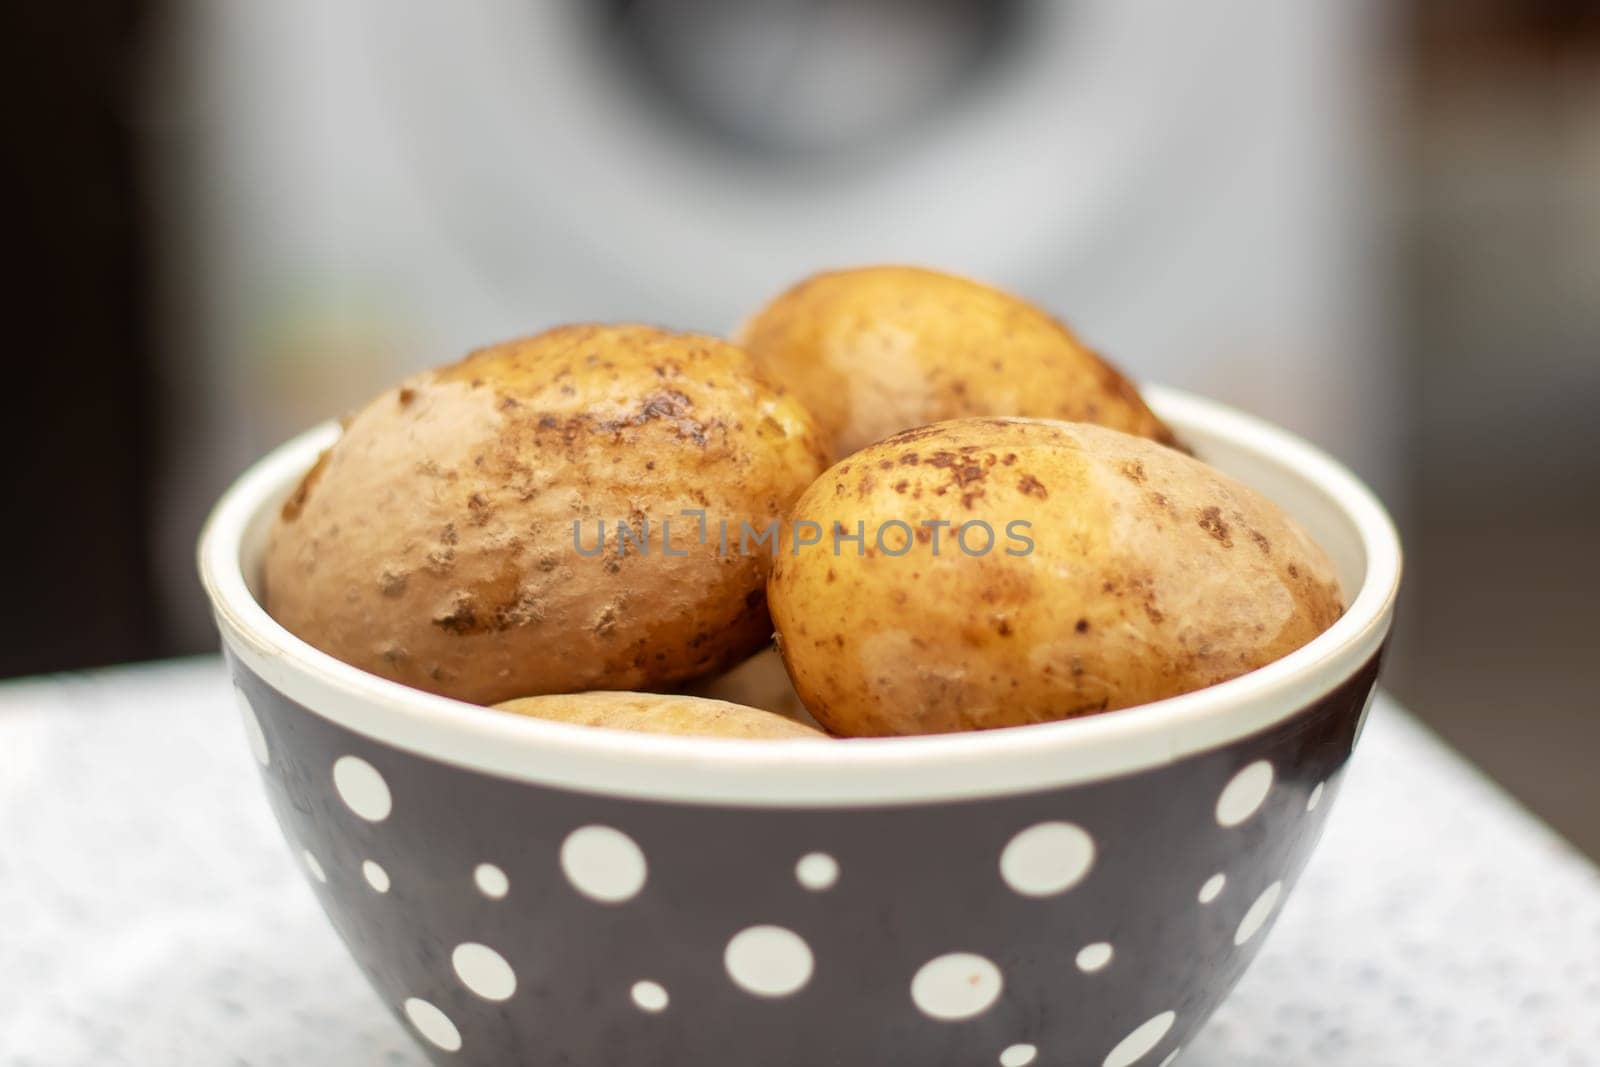 Potatoes, a staple food, are being boiled in a pan with water by Vera1703